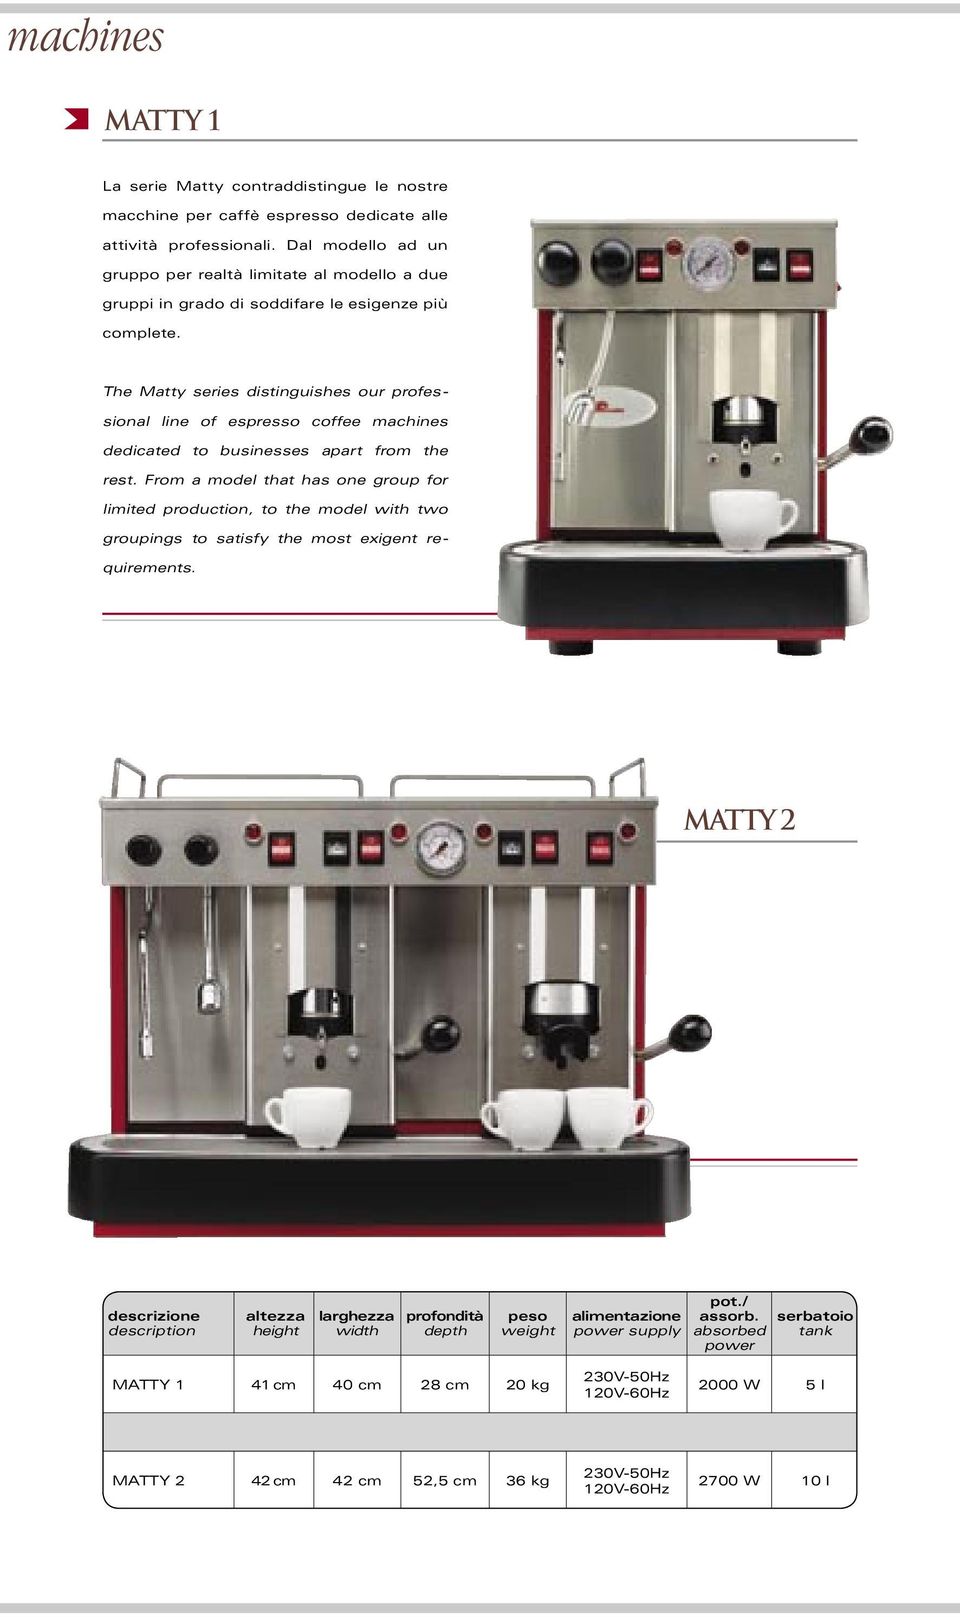 The Matty series distinguishes our professional line of espresso coffee machines dedicated to businesses apart from the rest.